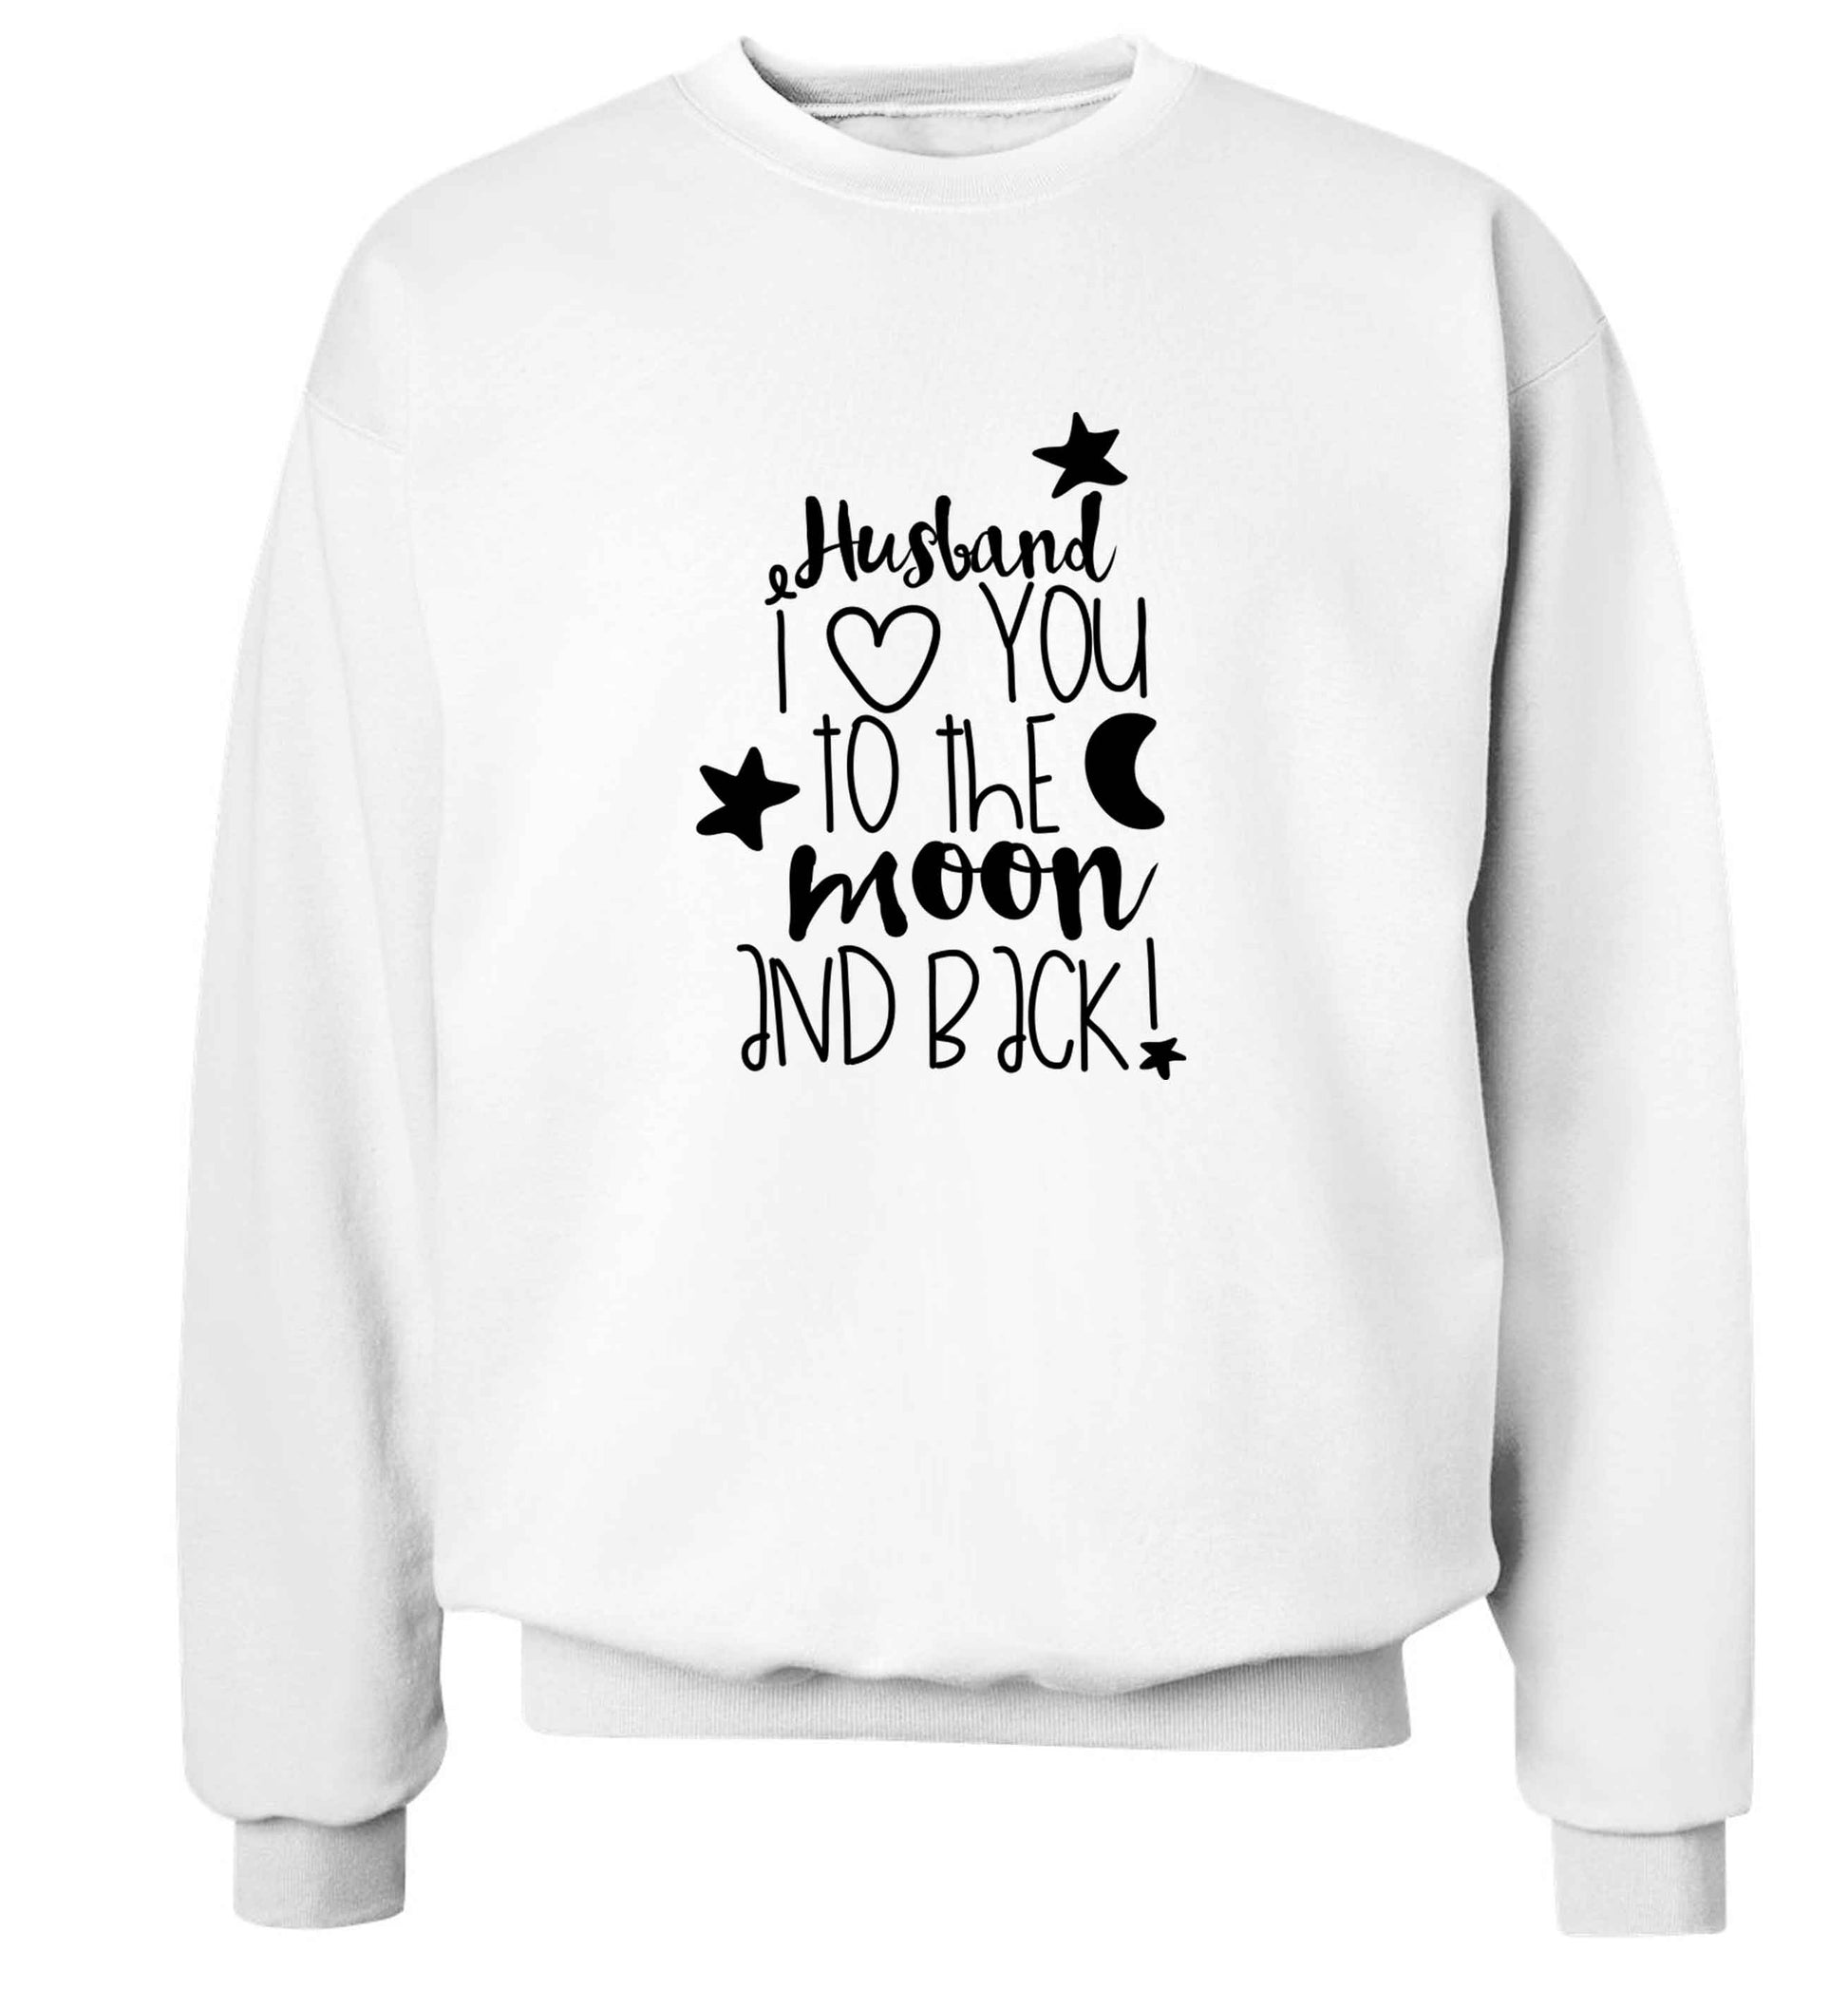 Husband I love you to the moon and back adult's unisex white sweater 2XL